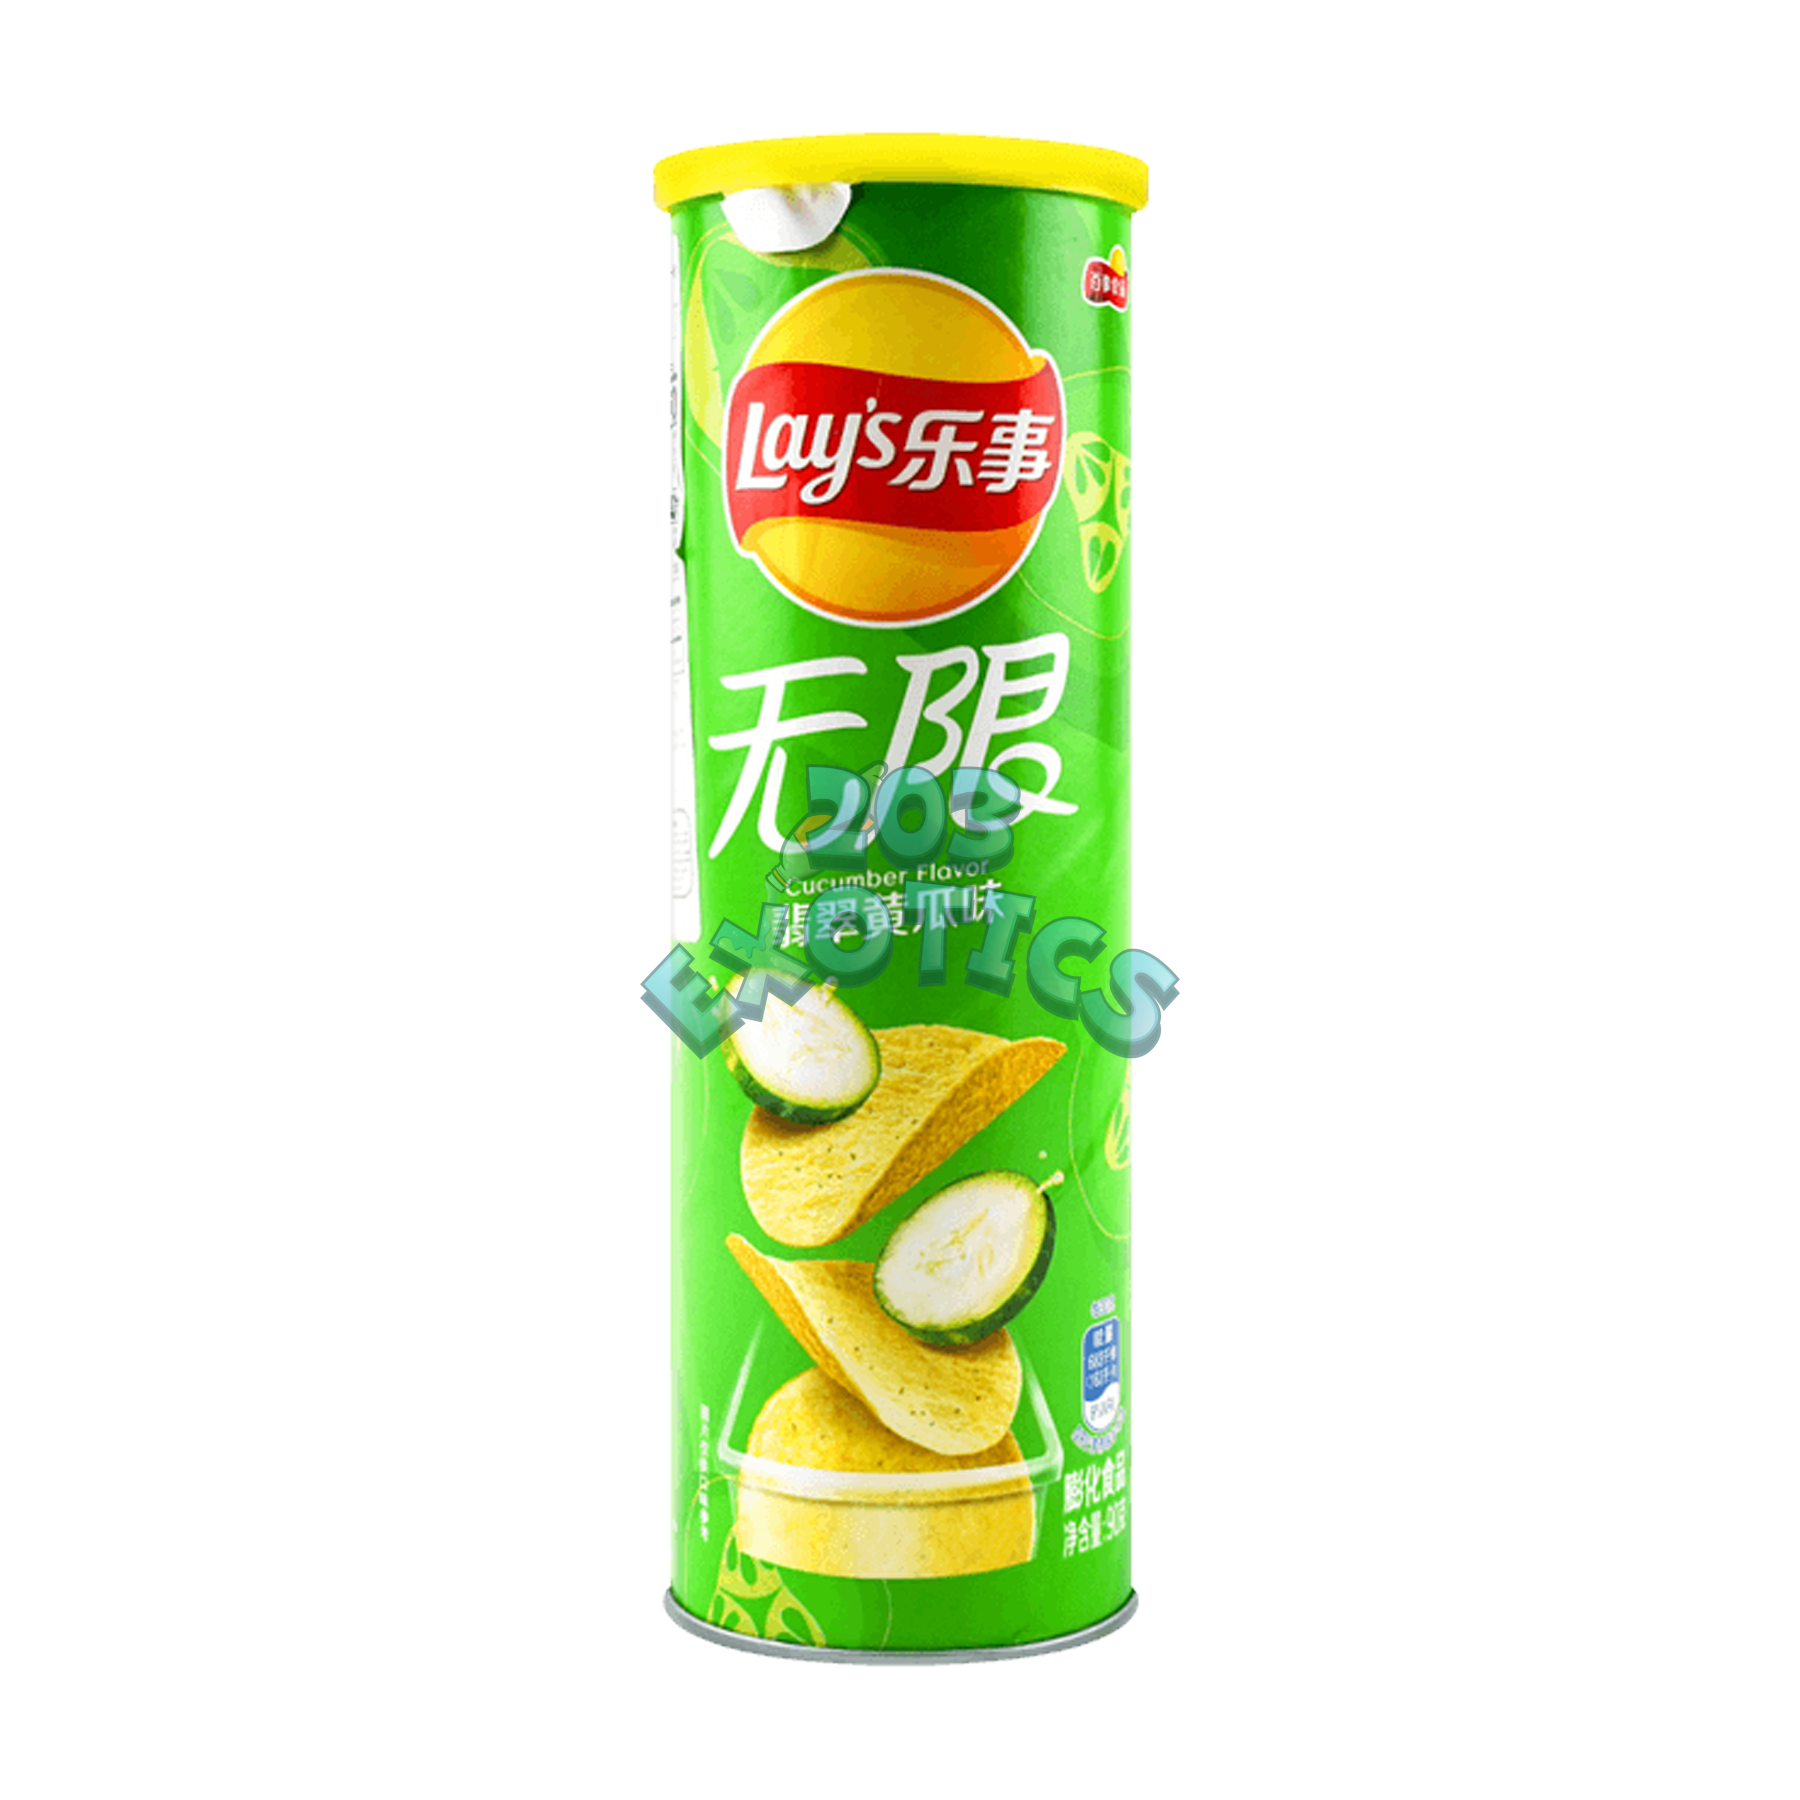 Lays Cucumber Flavored Chips